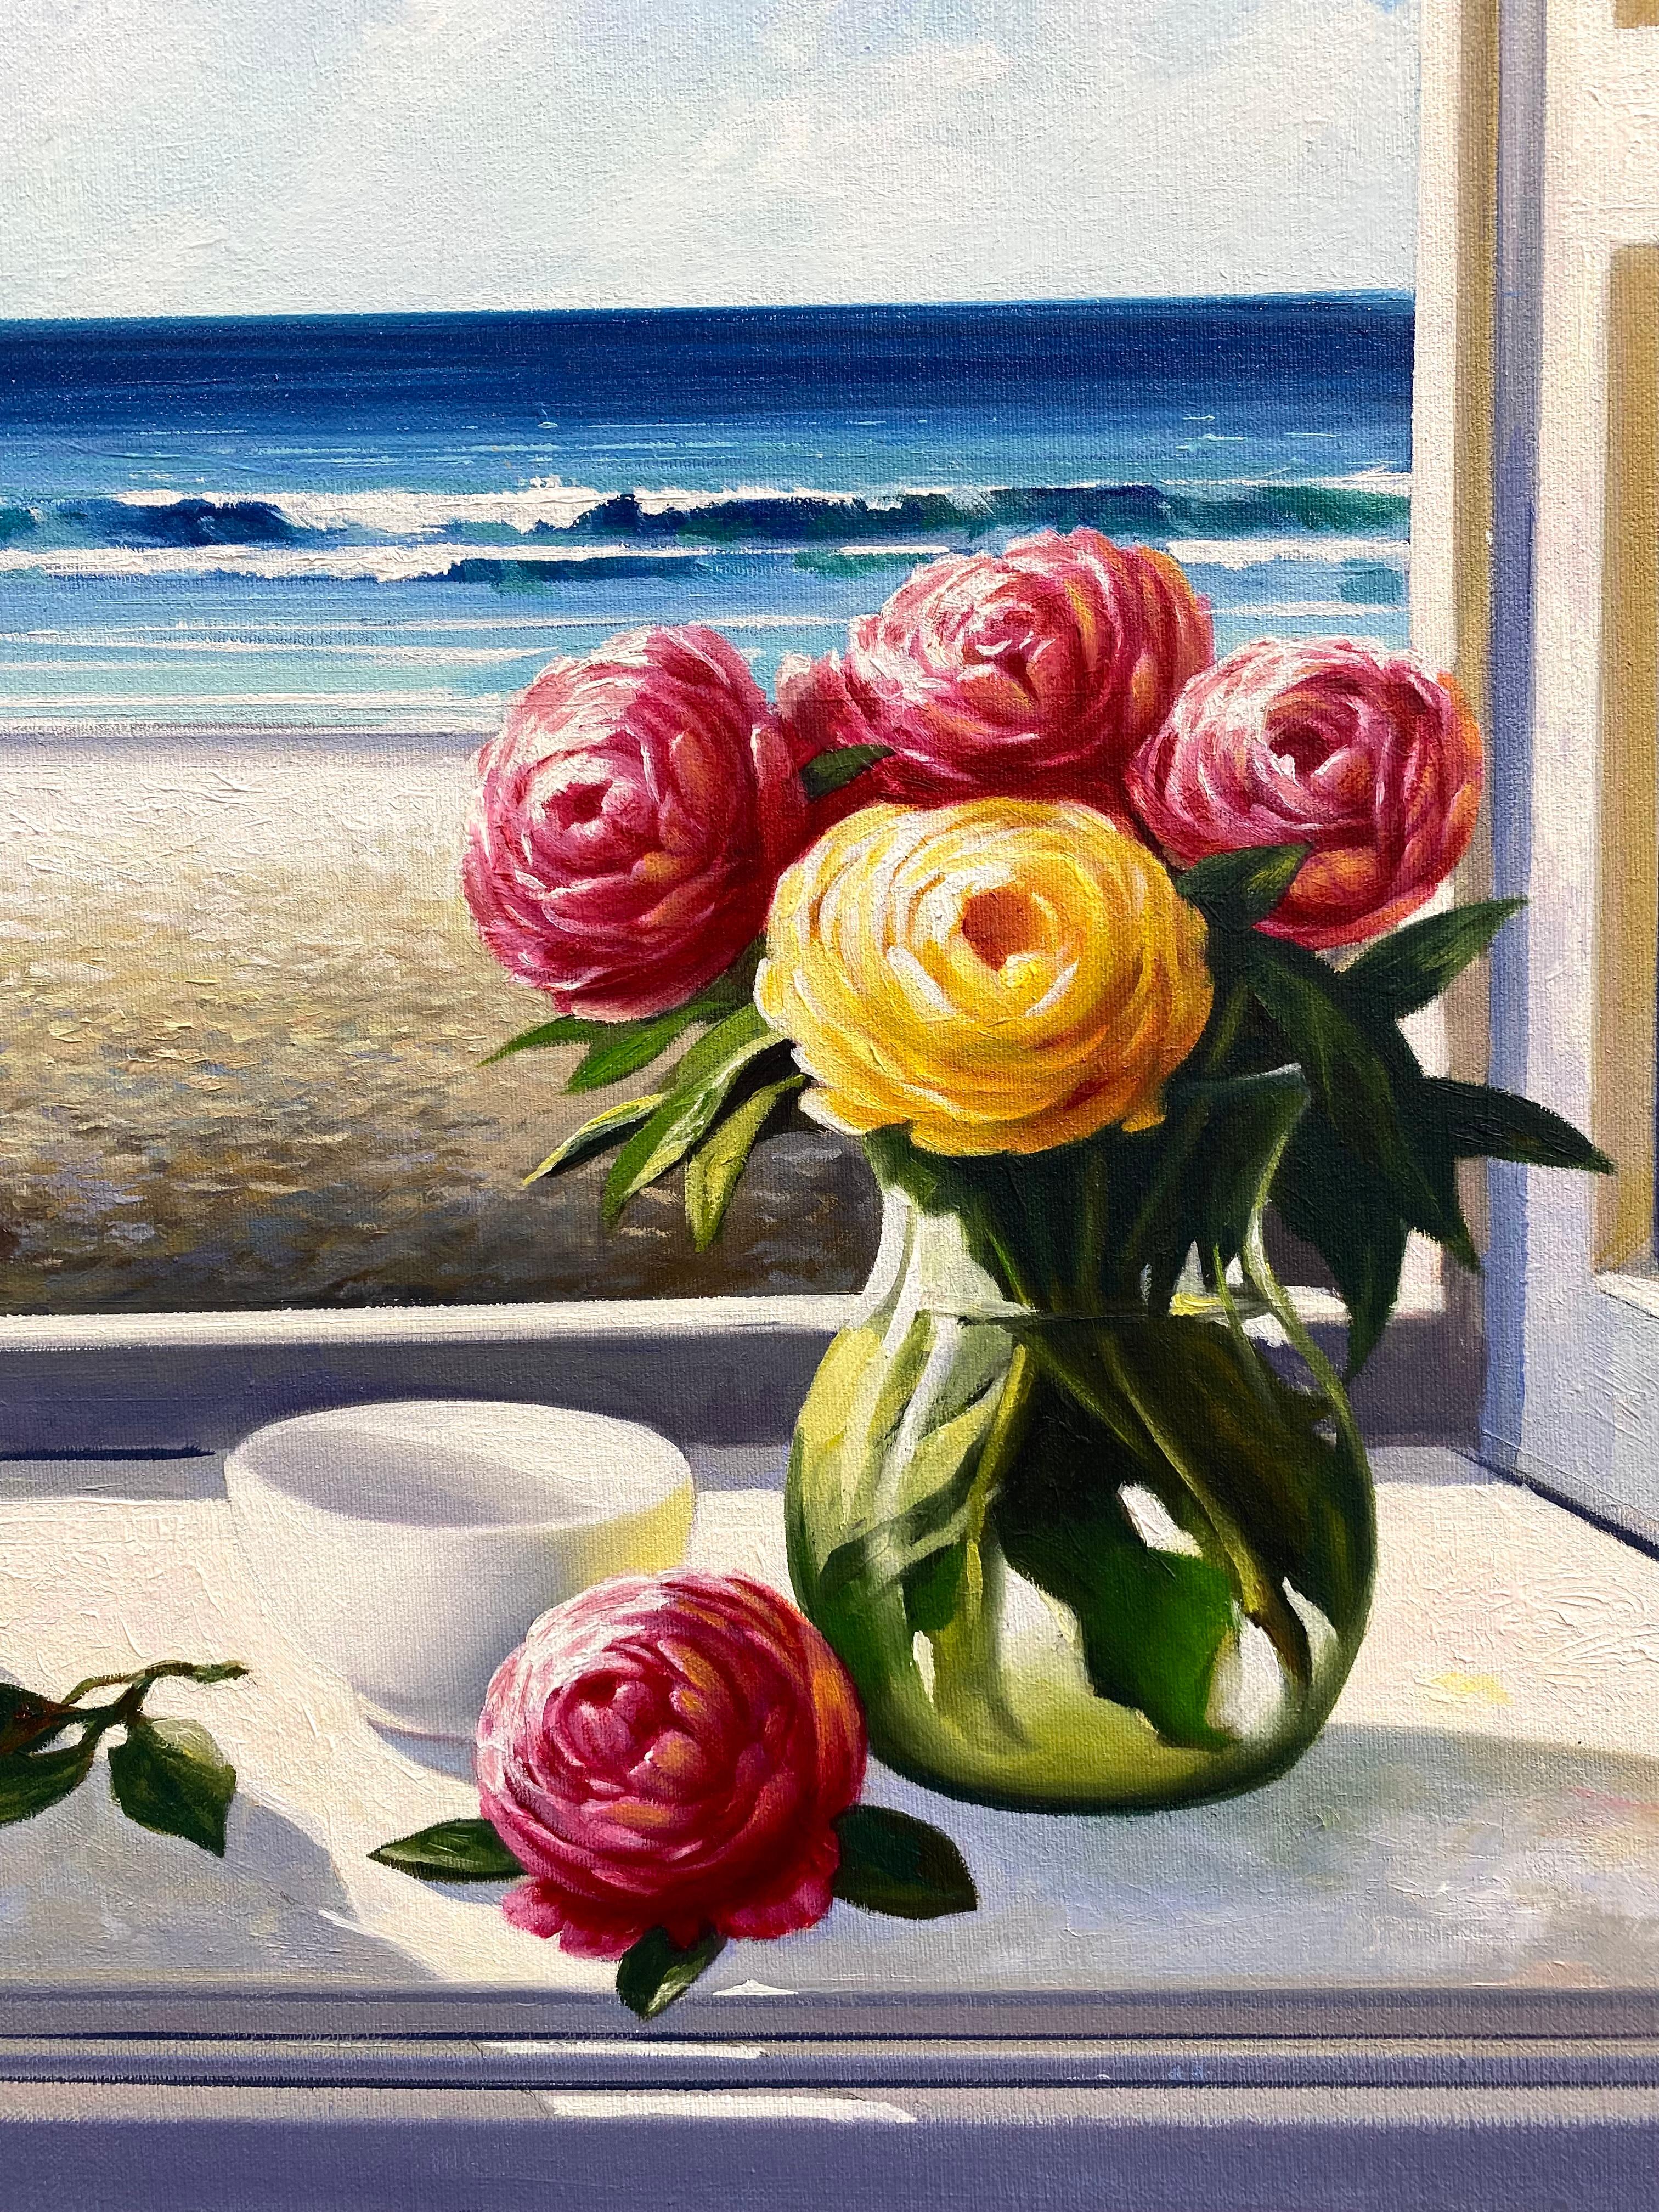 Pink peonies - original seascape oil painting - Painting by Luis Fuentes